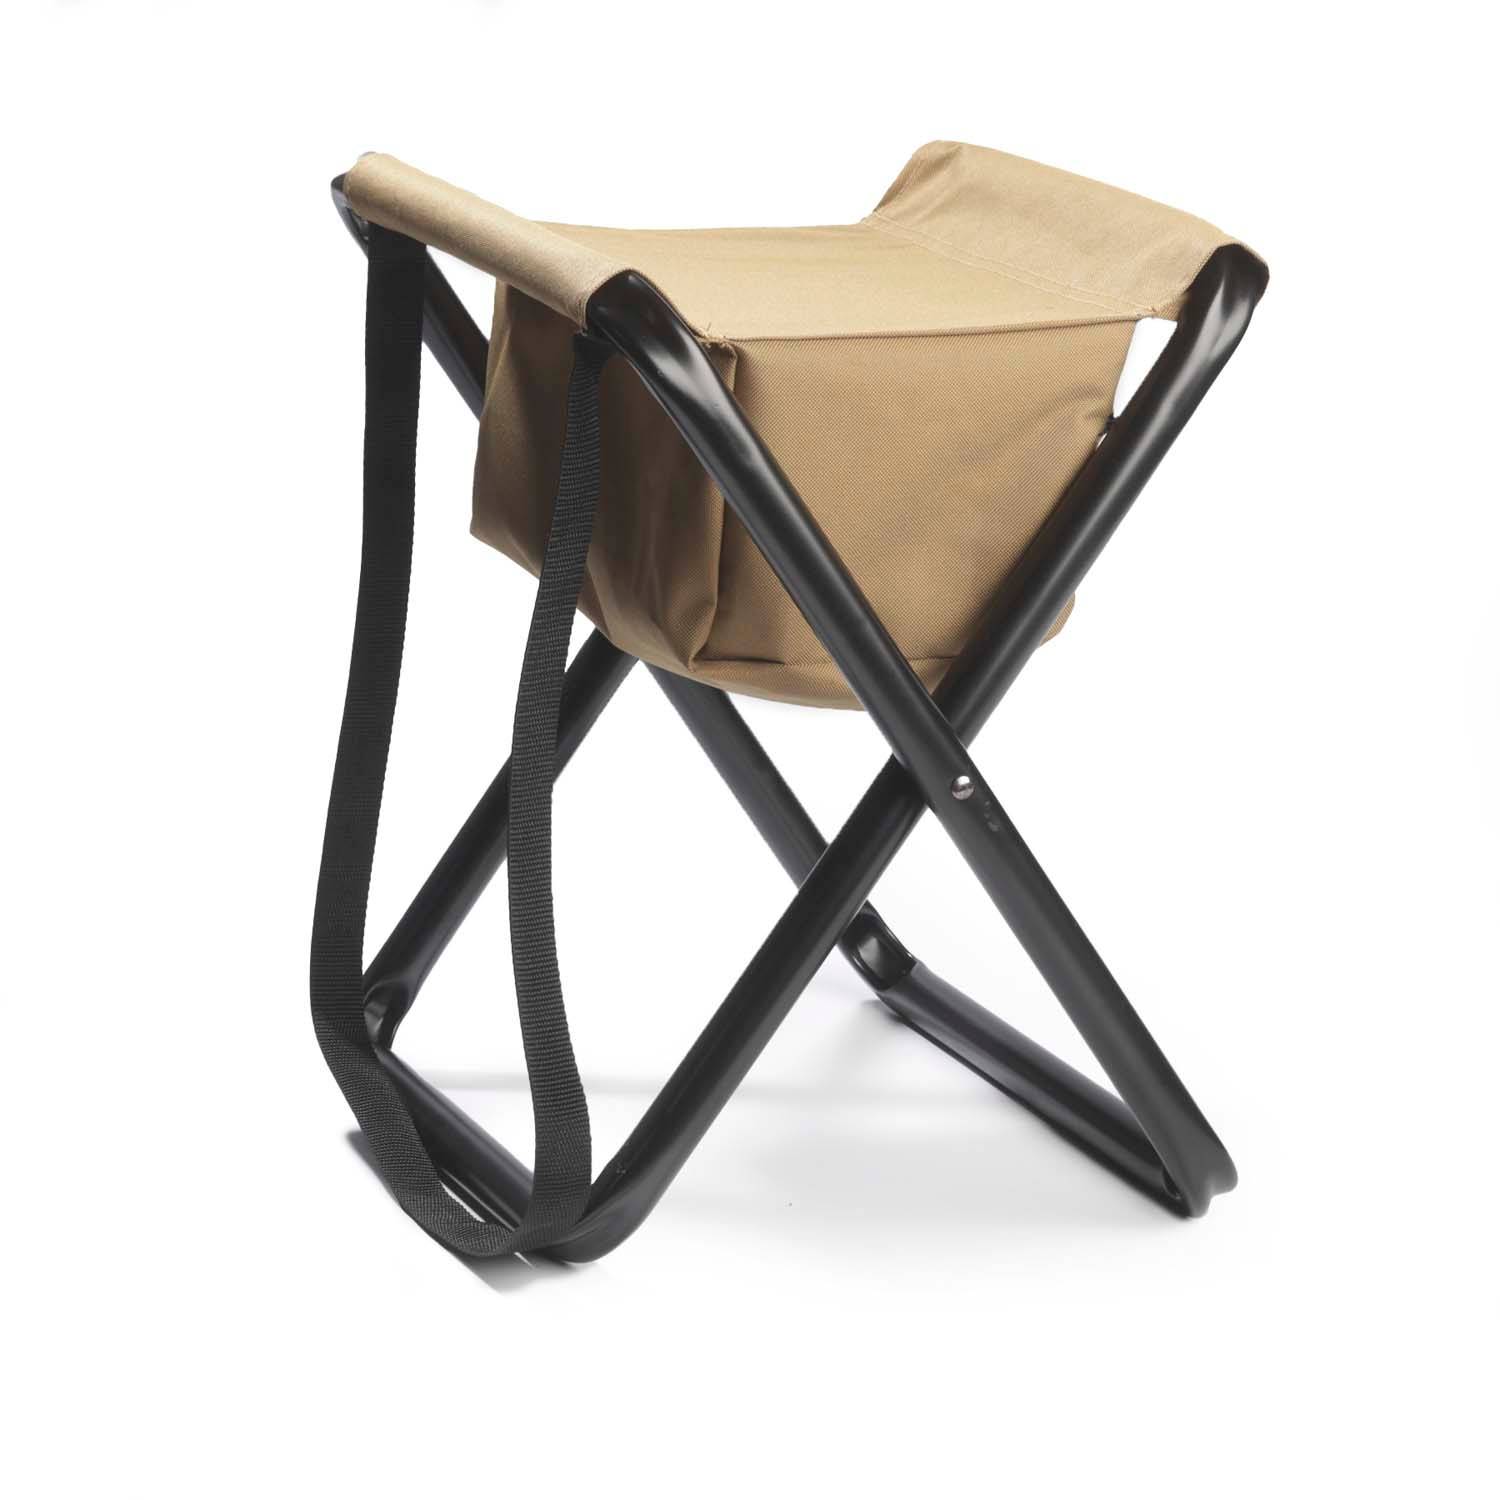 collapsible stool portable